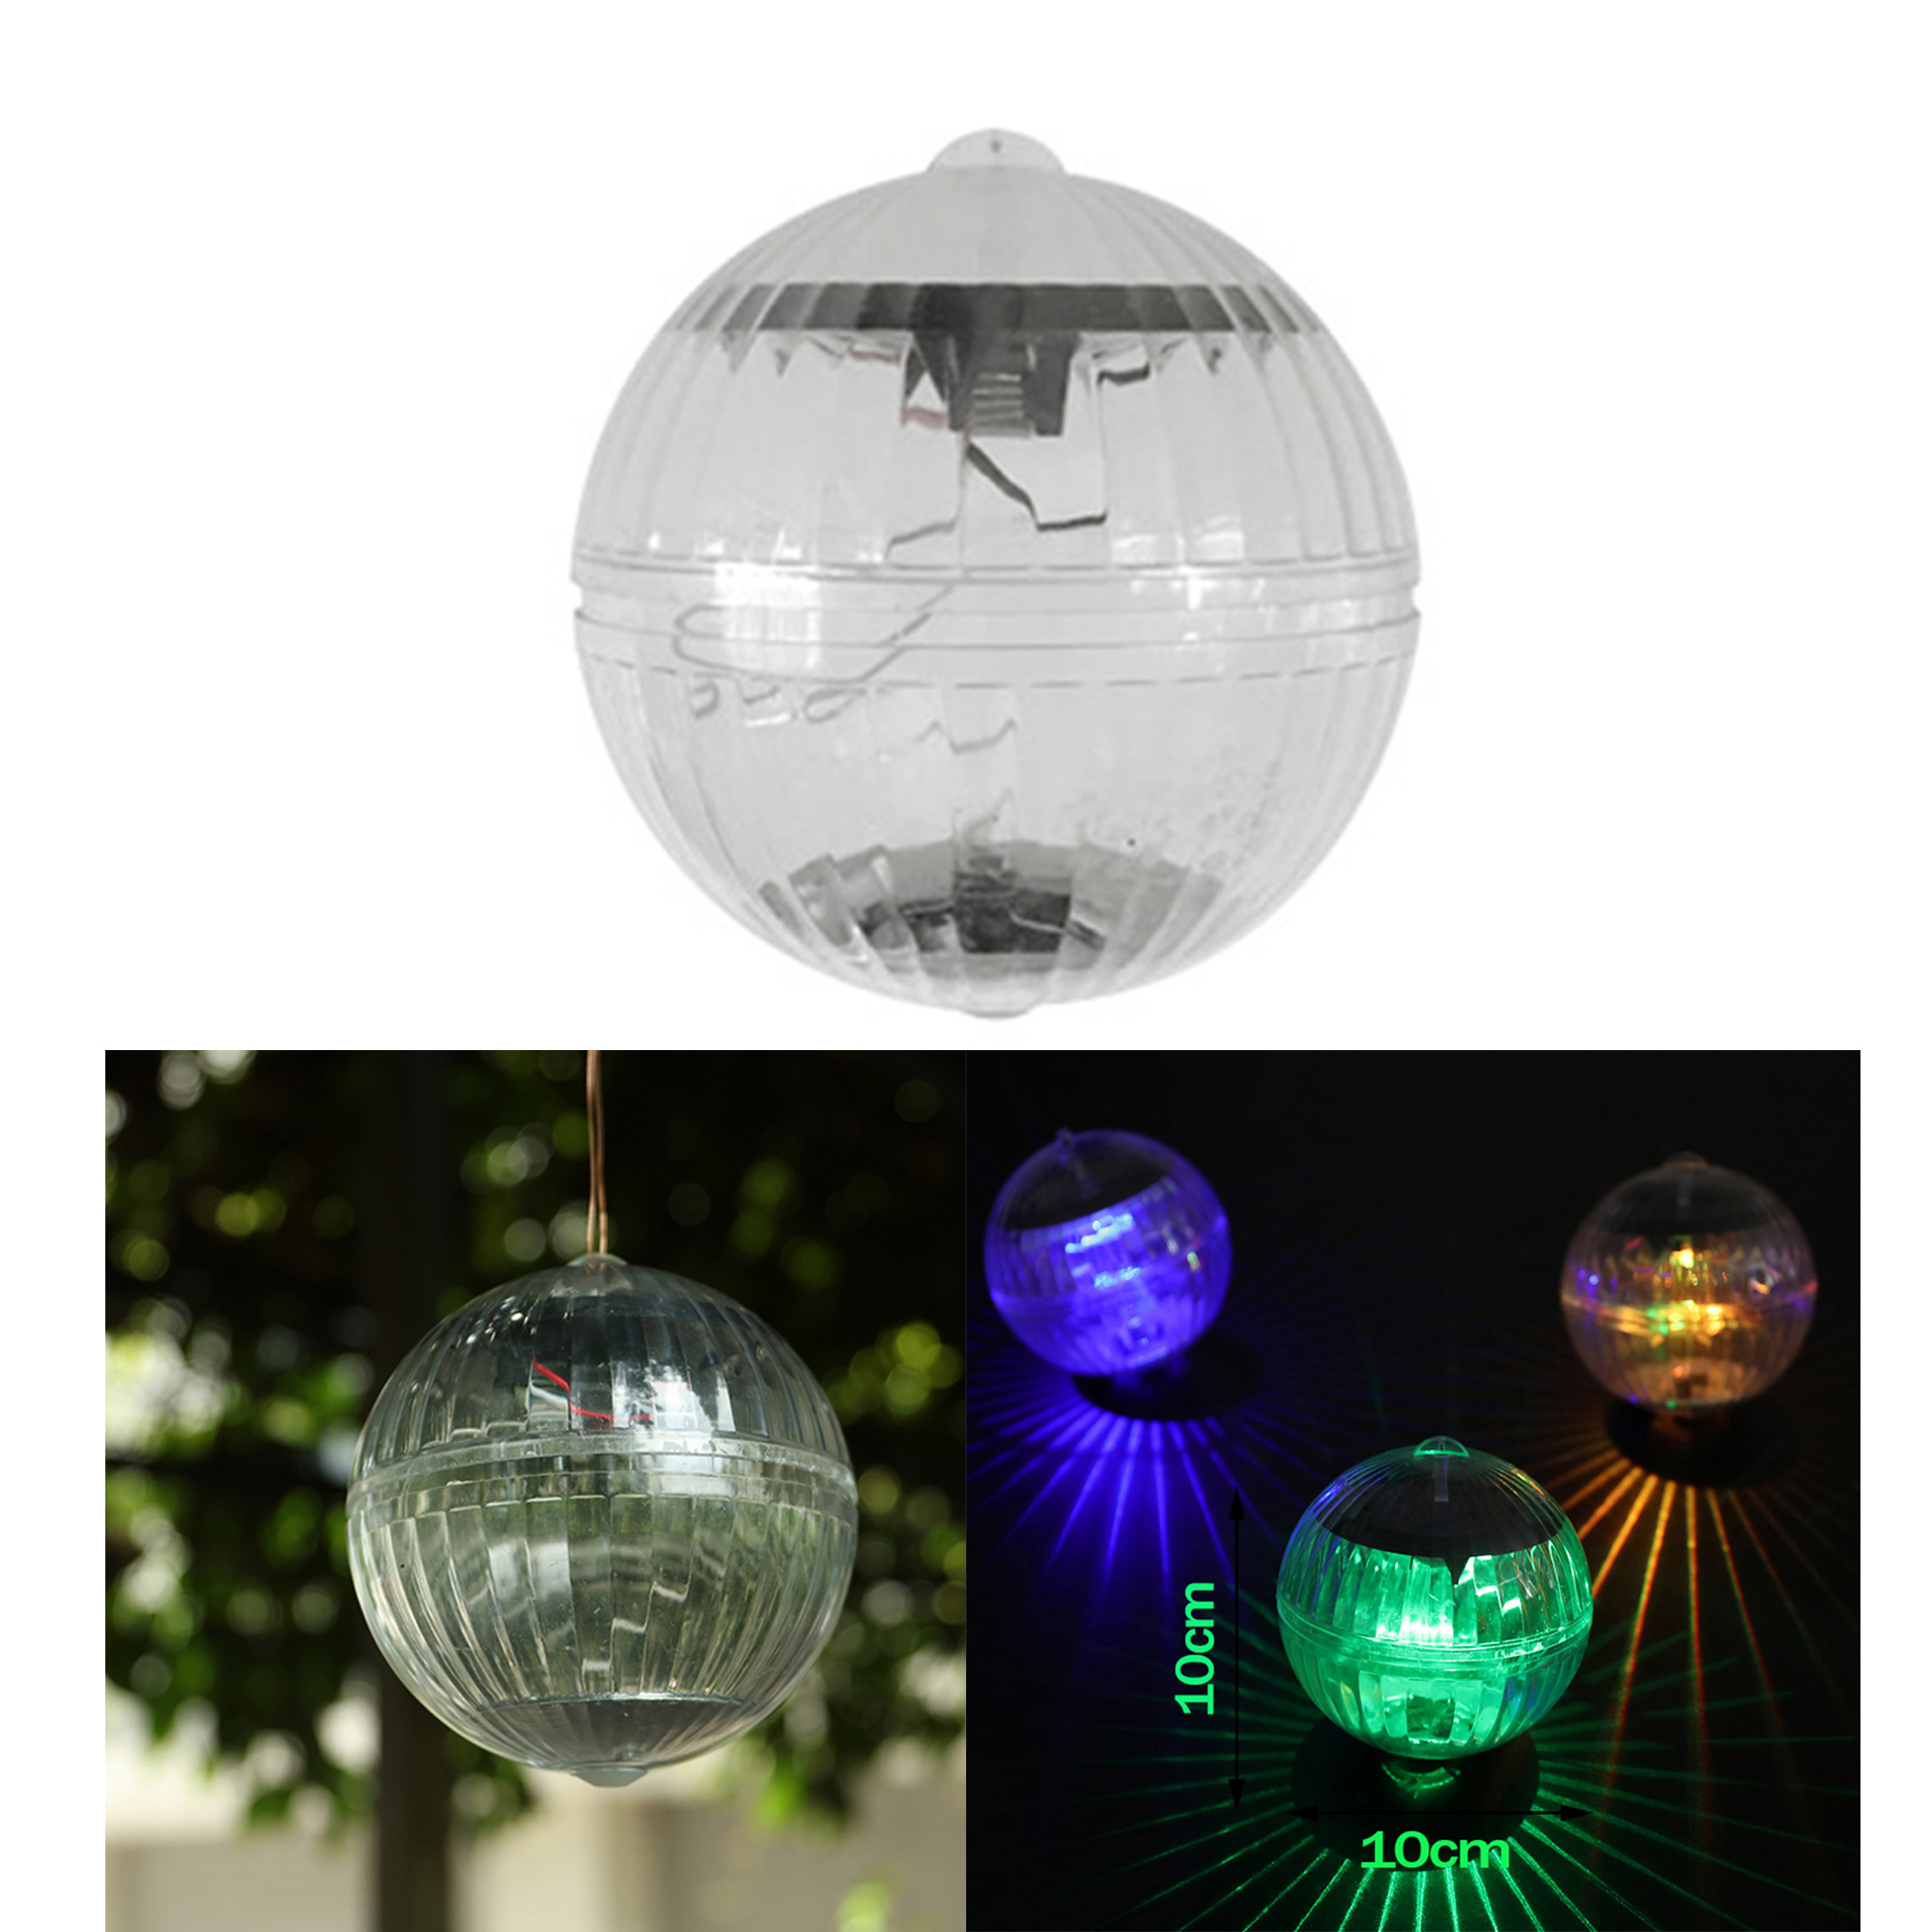 LELINTA Waterproof Solar Rotatable Outdoor Garden Camping Hanging  Solar Powered LED Round Floating Ball Lights Lamp Decor Light for Swimming Pool,Solar Pool Light,LED Solar Light - image 1 of 8